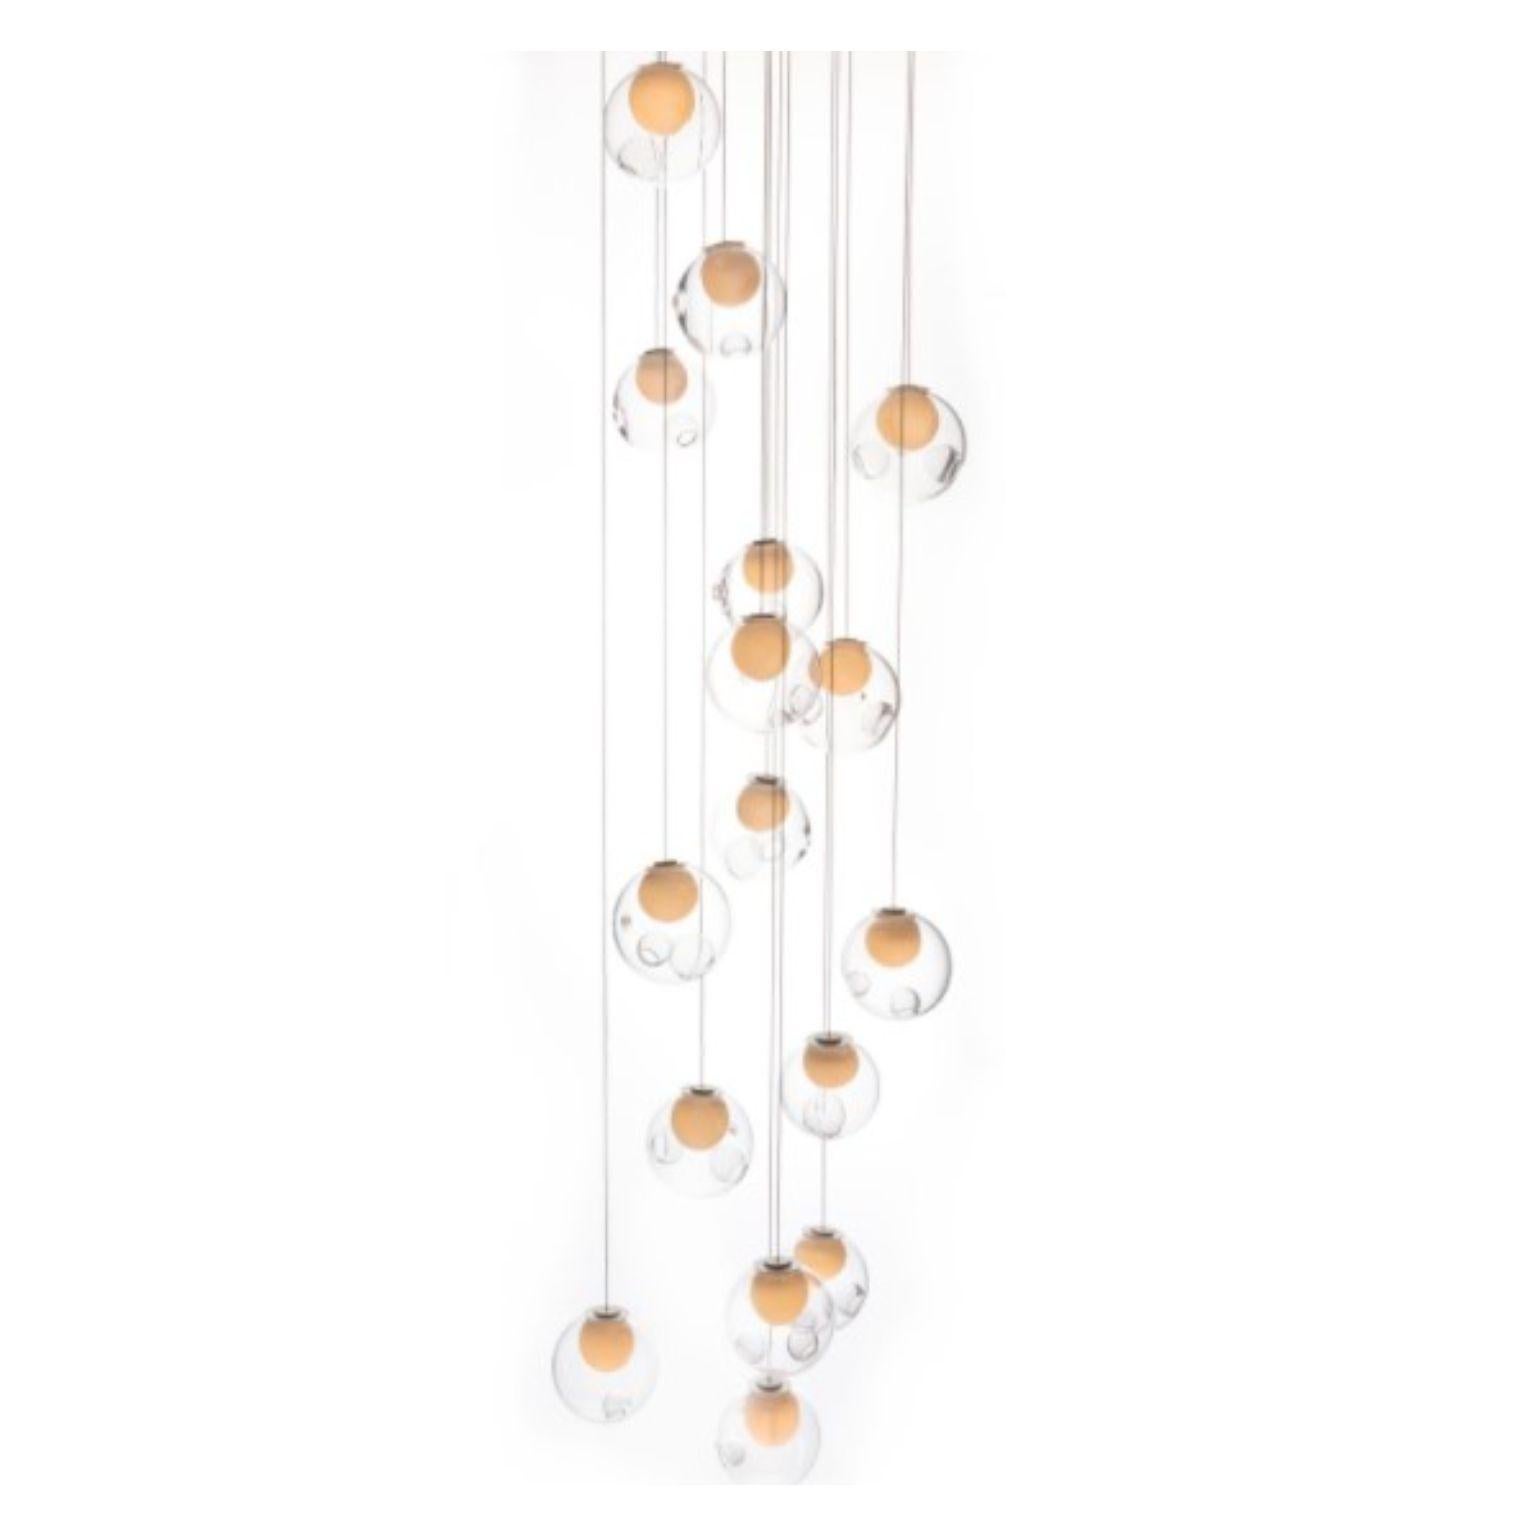 28.16 Pendant by Bocci
Dimensions: D60 x H300 cm
Materials: diameter brushed nickel canopy
Weight: 39.5 kg
Also Available in different dimensions.

All our lamps can be wired according to each country. If sold to the USA it will be wired for